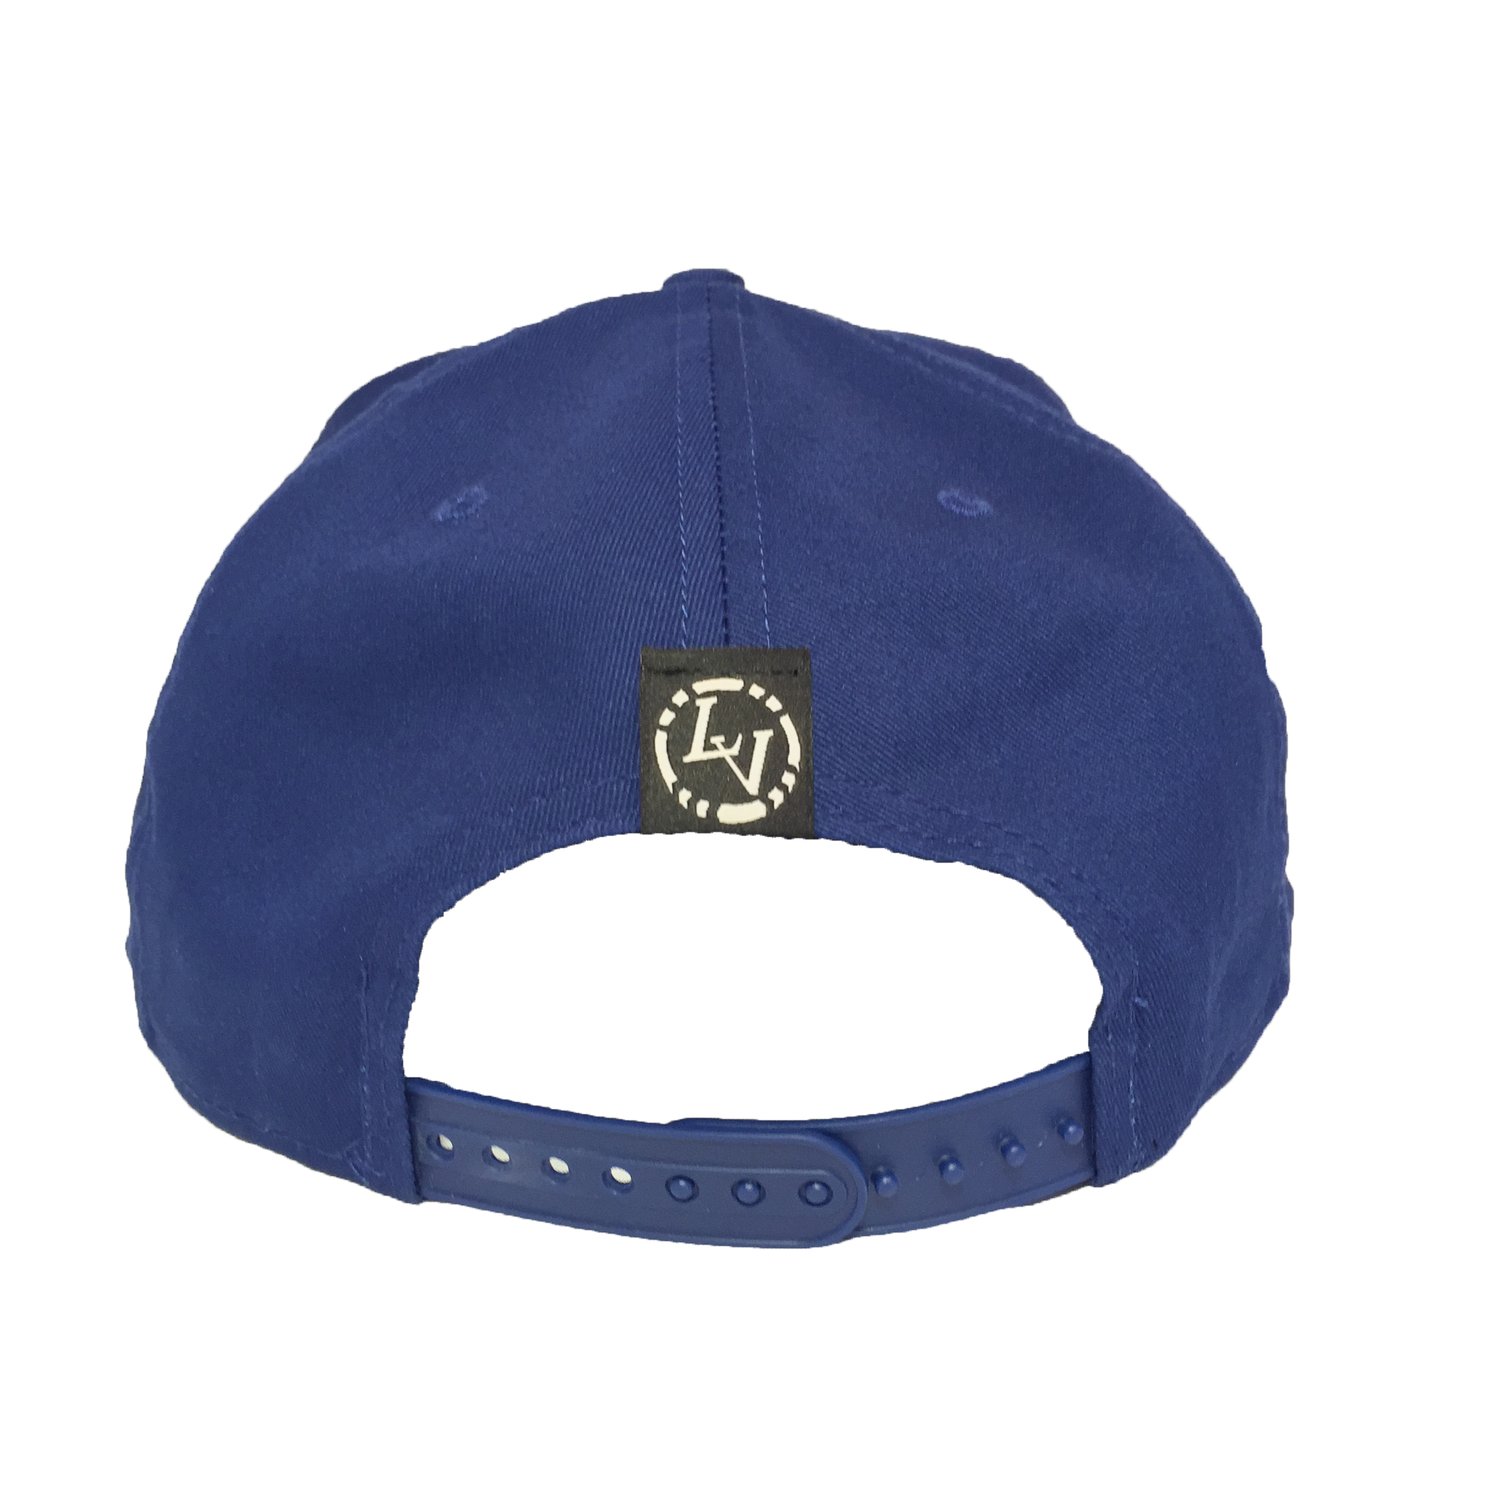 Image of 1st Rounders New Era 9Fifty - ROYAL/ORG